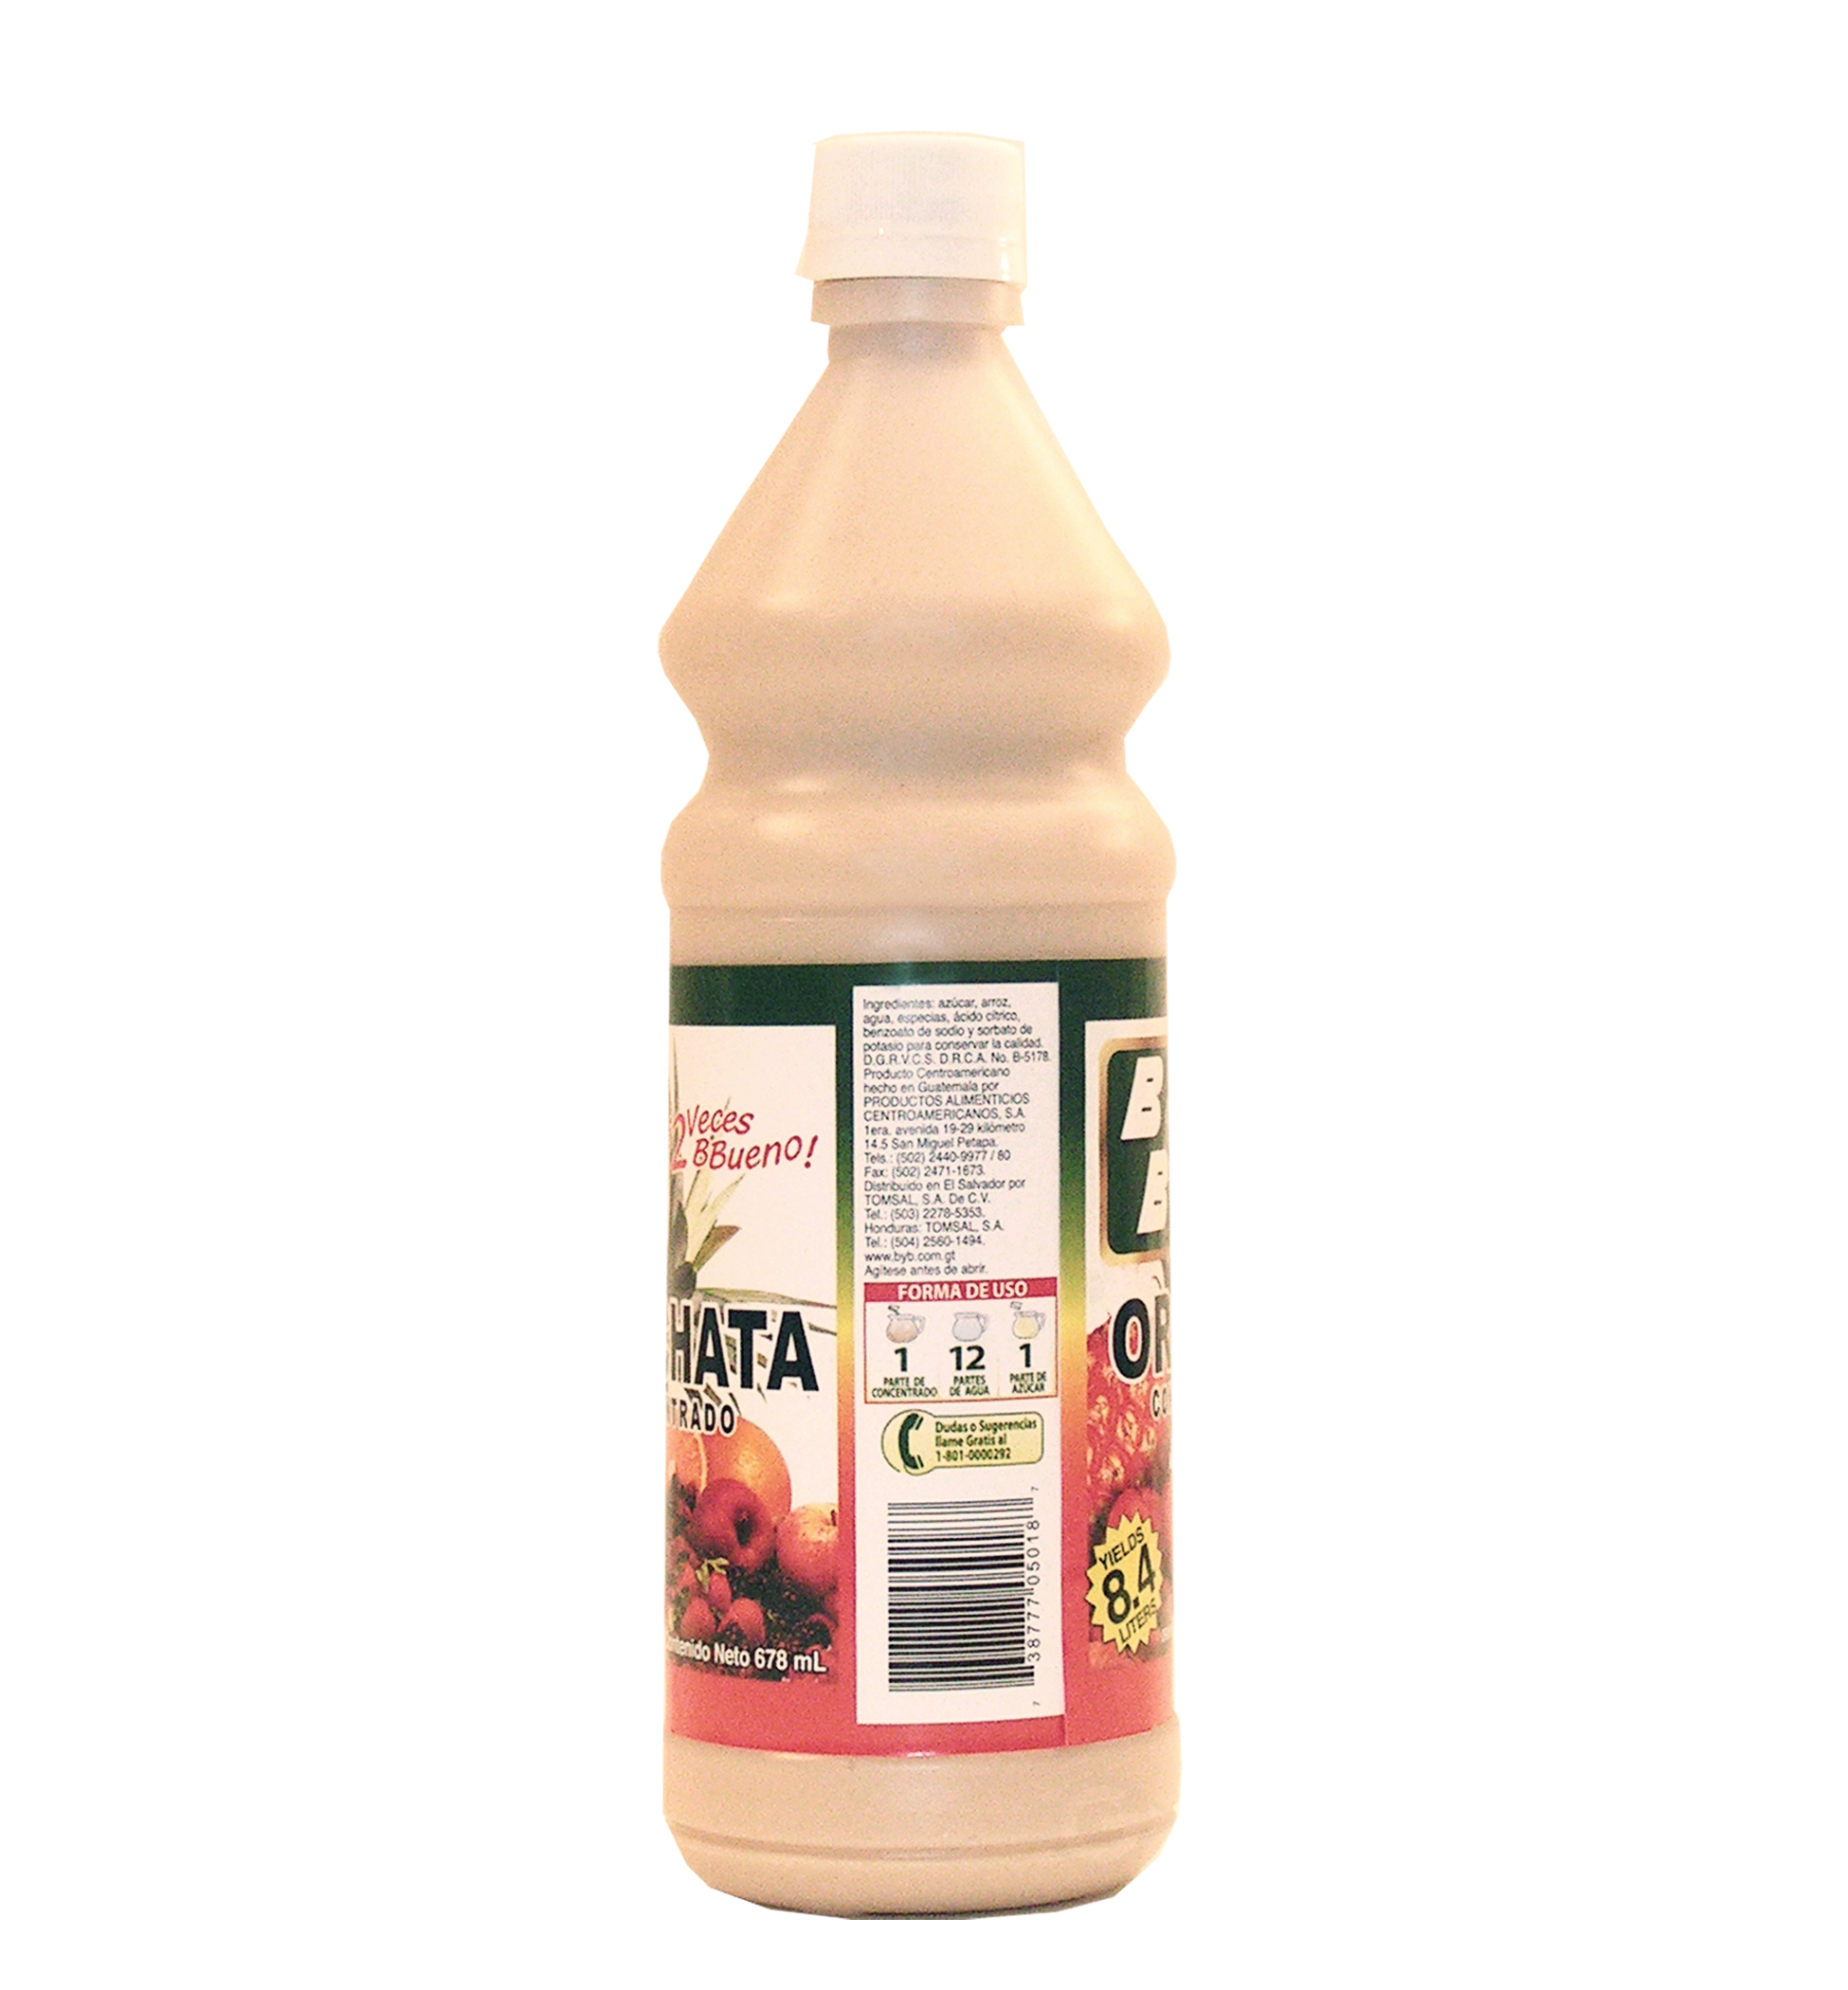 B&B Orgeat Concentrate 22.9 oz - Concentrado de Horchata (Pack of 1) - image 2 of 4